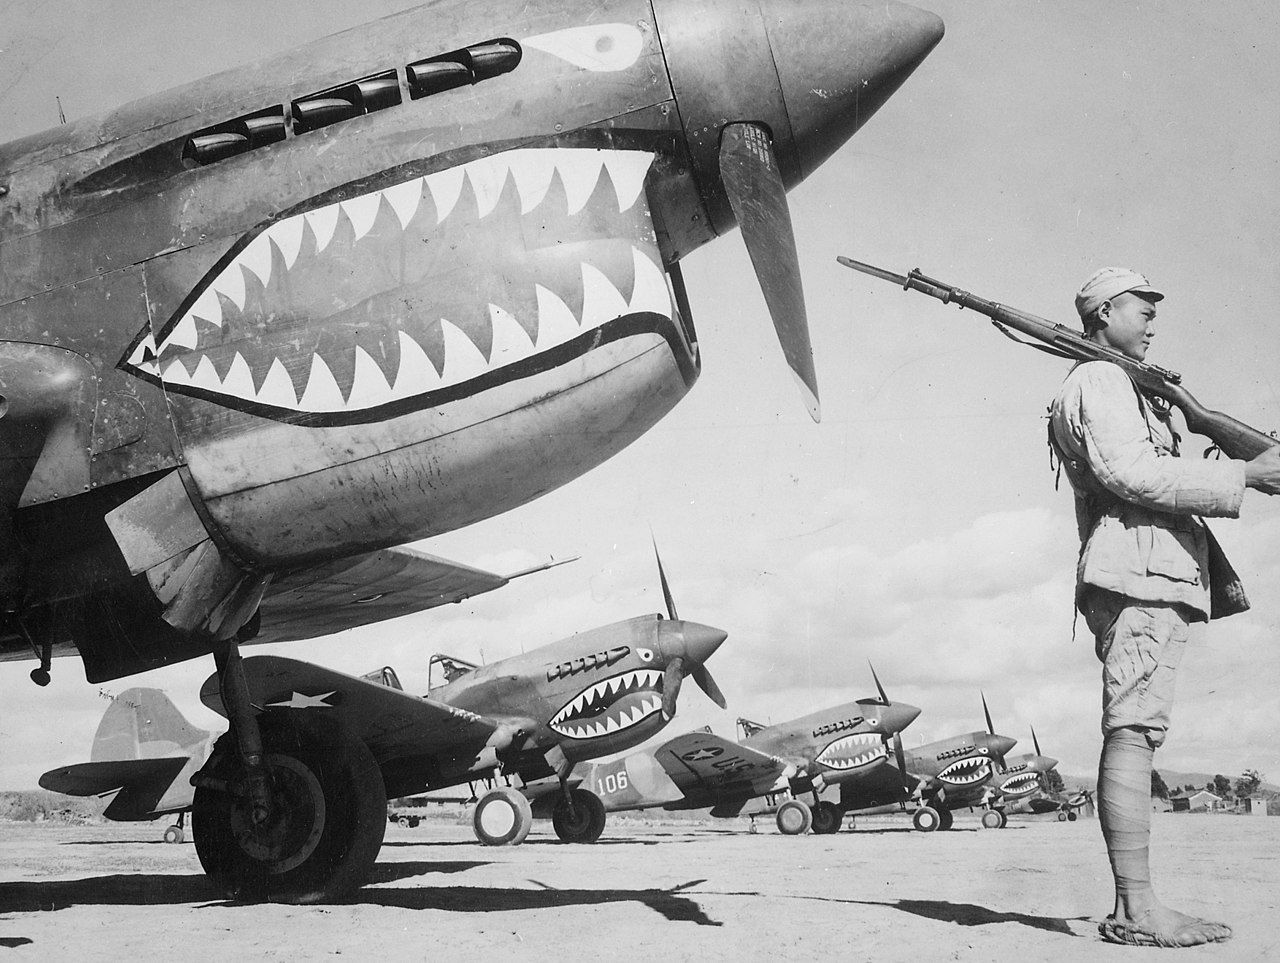 Several Curtiss P-40s with the famous shark mouth nose art parked on an airfield apron side by side.